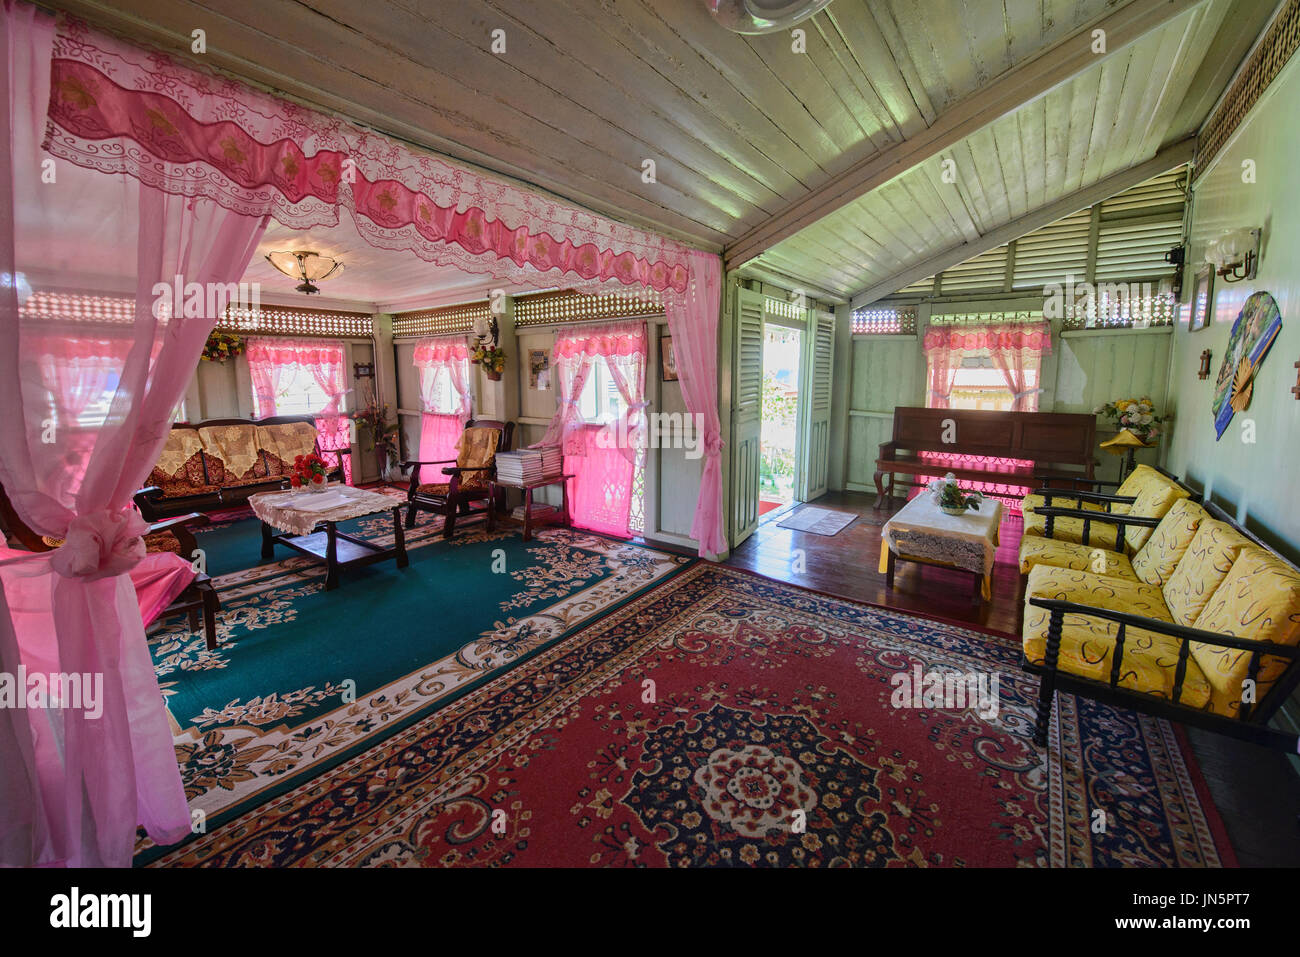 Interior of Villa Sentosa, preserved traditional home and living museum in Kampung Morten, Malacca, Malaysia Stock Photo